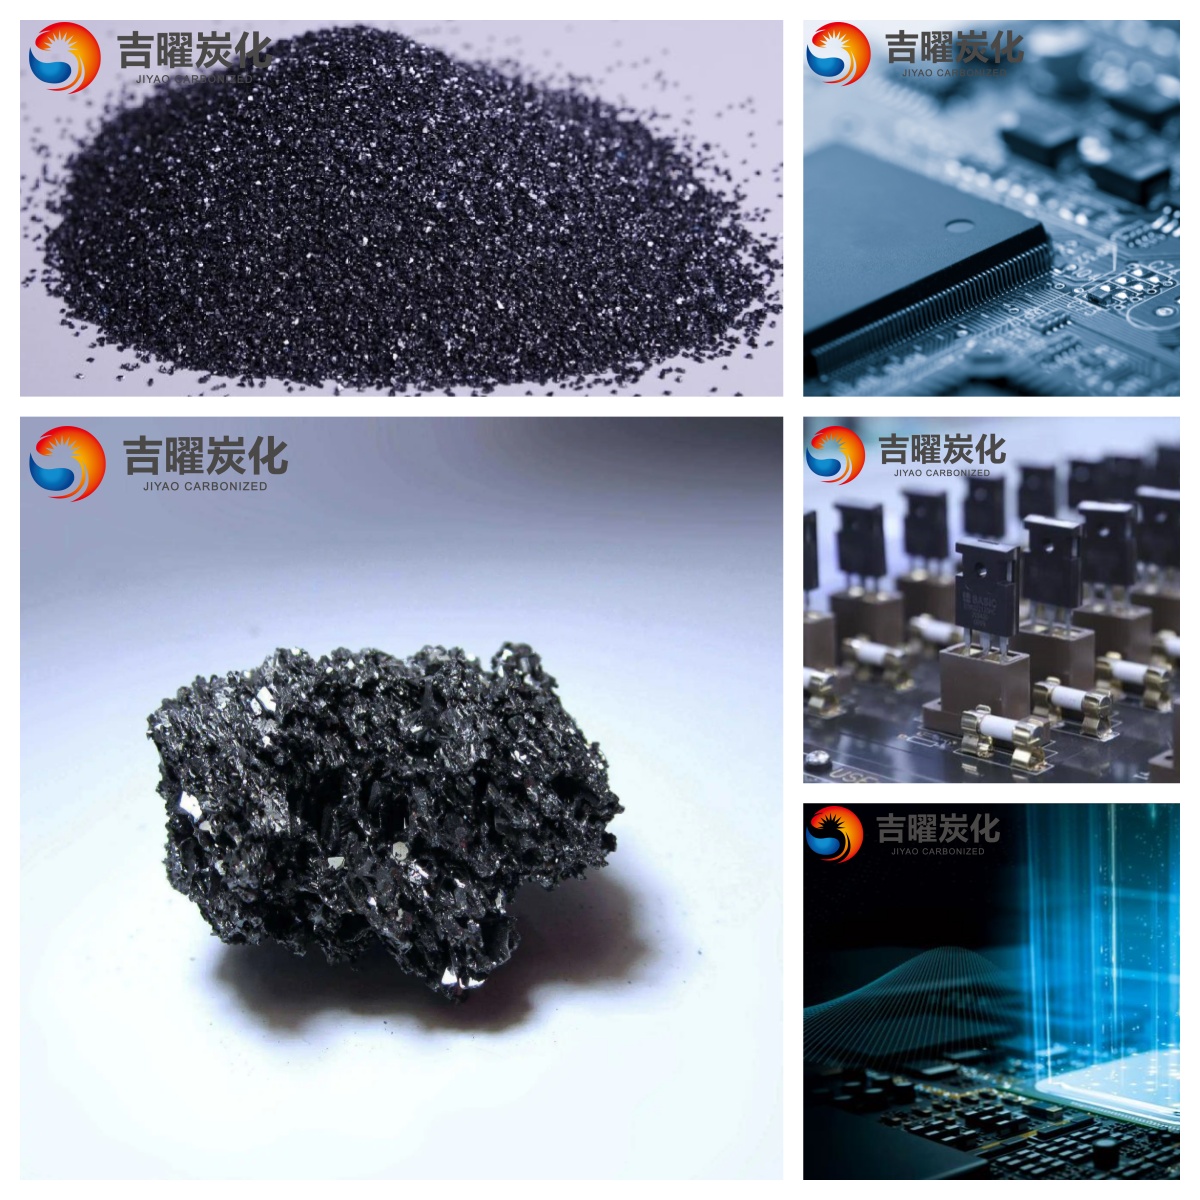 Brief introduction to the production process and specific applications of silicon carbide.